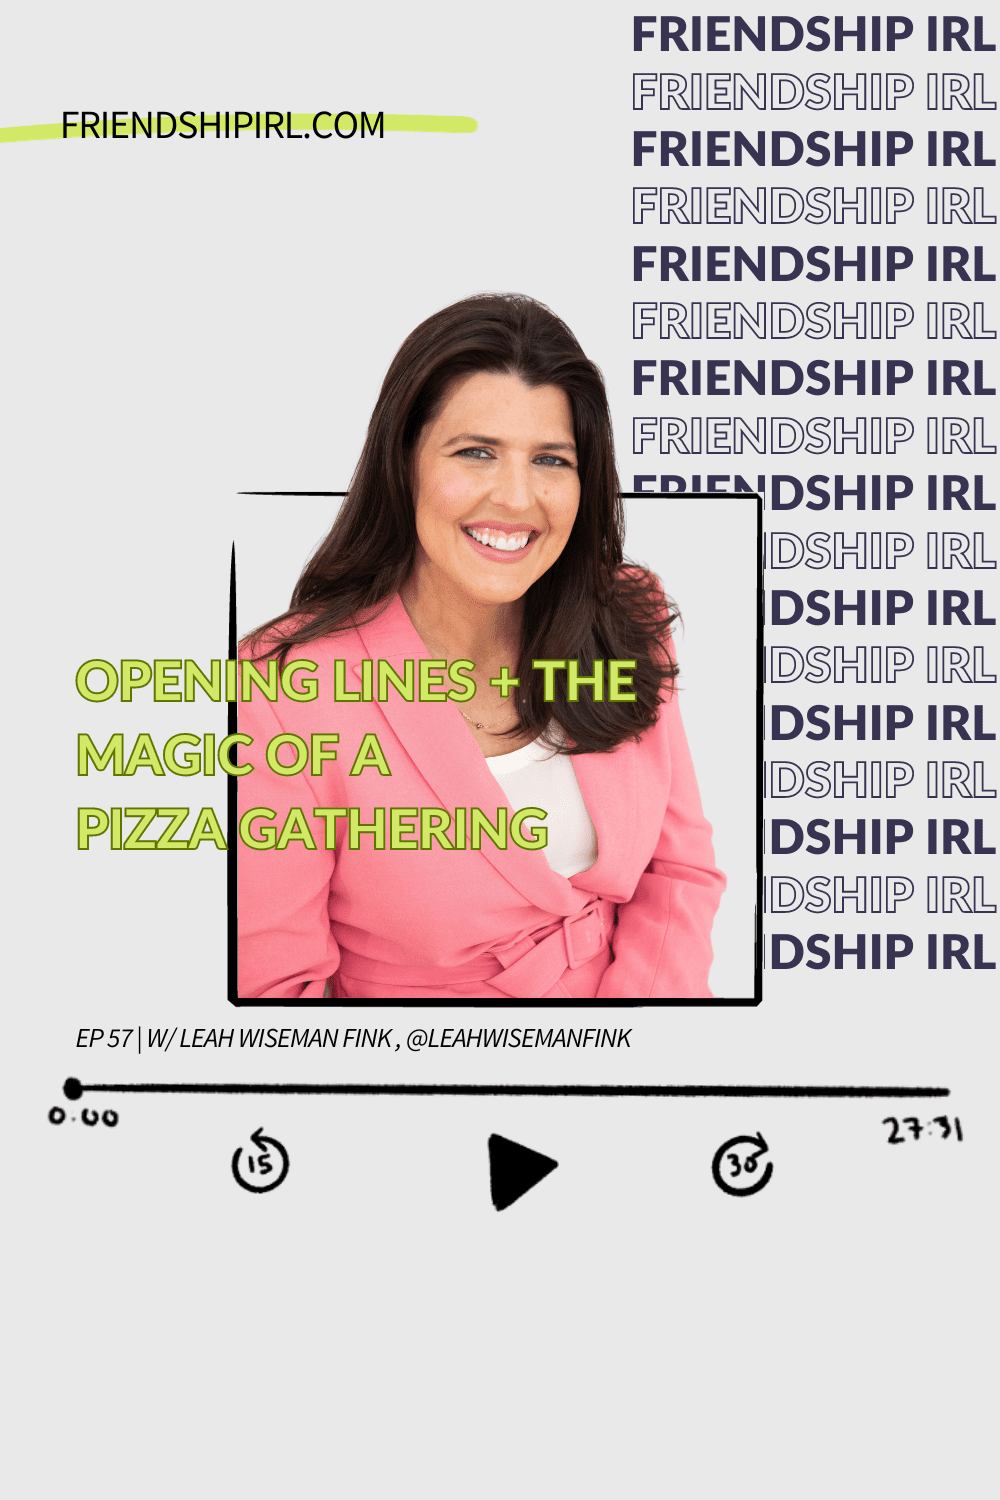 Friendship IRL Podcast - Episode 57 with Leah Wisemank Fink, Co-Owner of Williamsburg Pizza - Episode is titled Opening Lines and the Magic of a Pizza Gathering with Leah Wiseman Fink